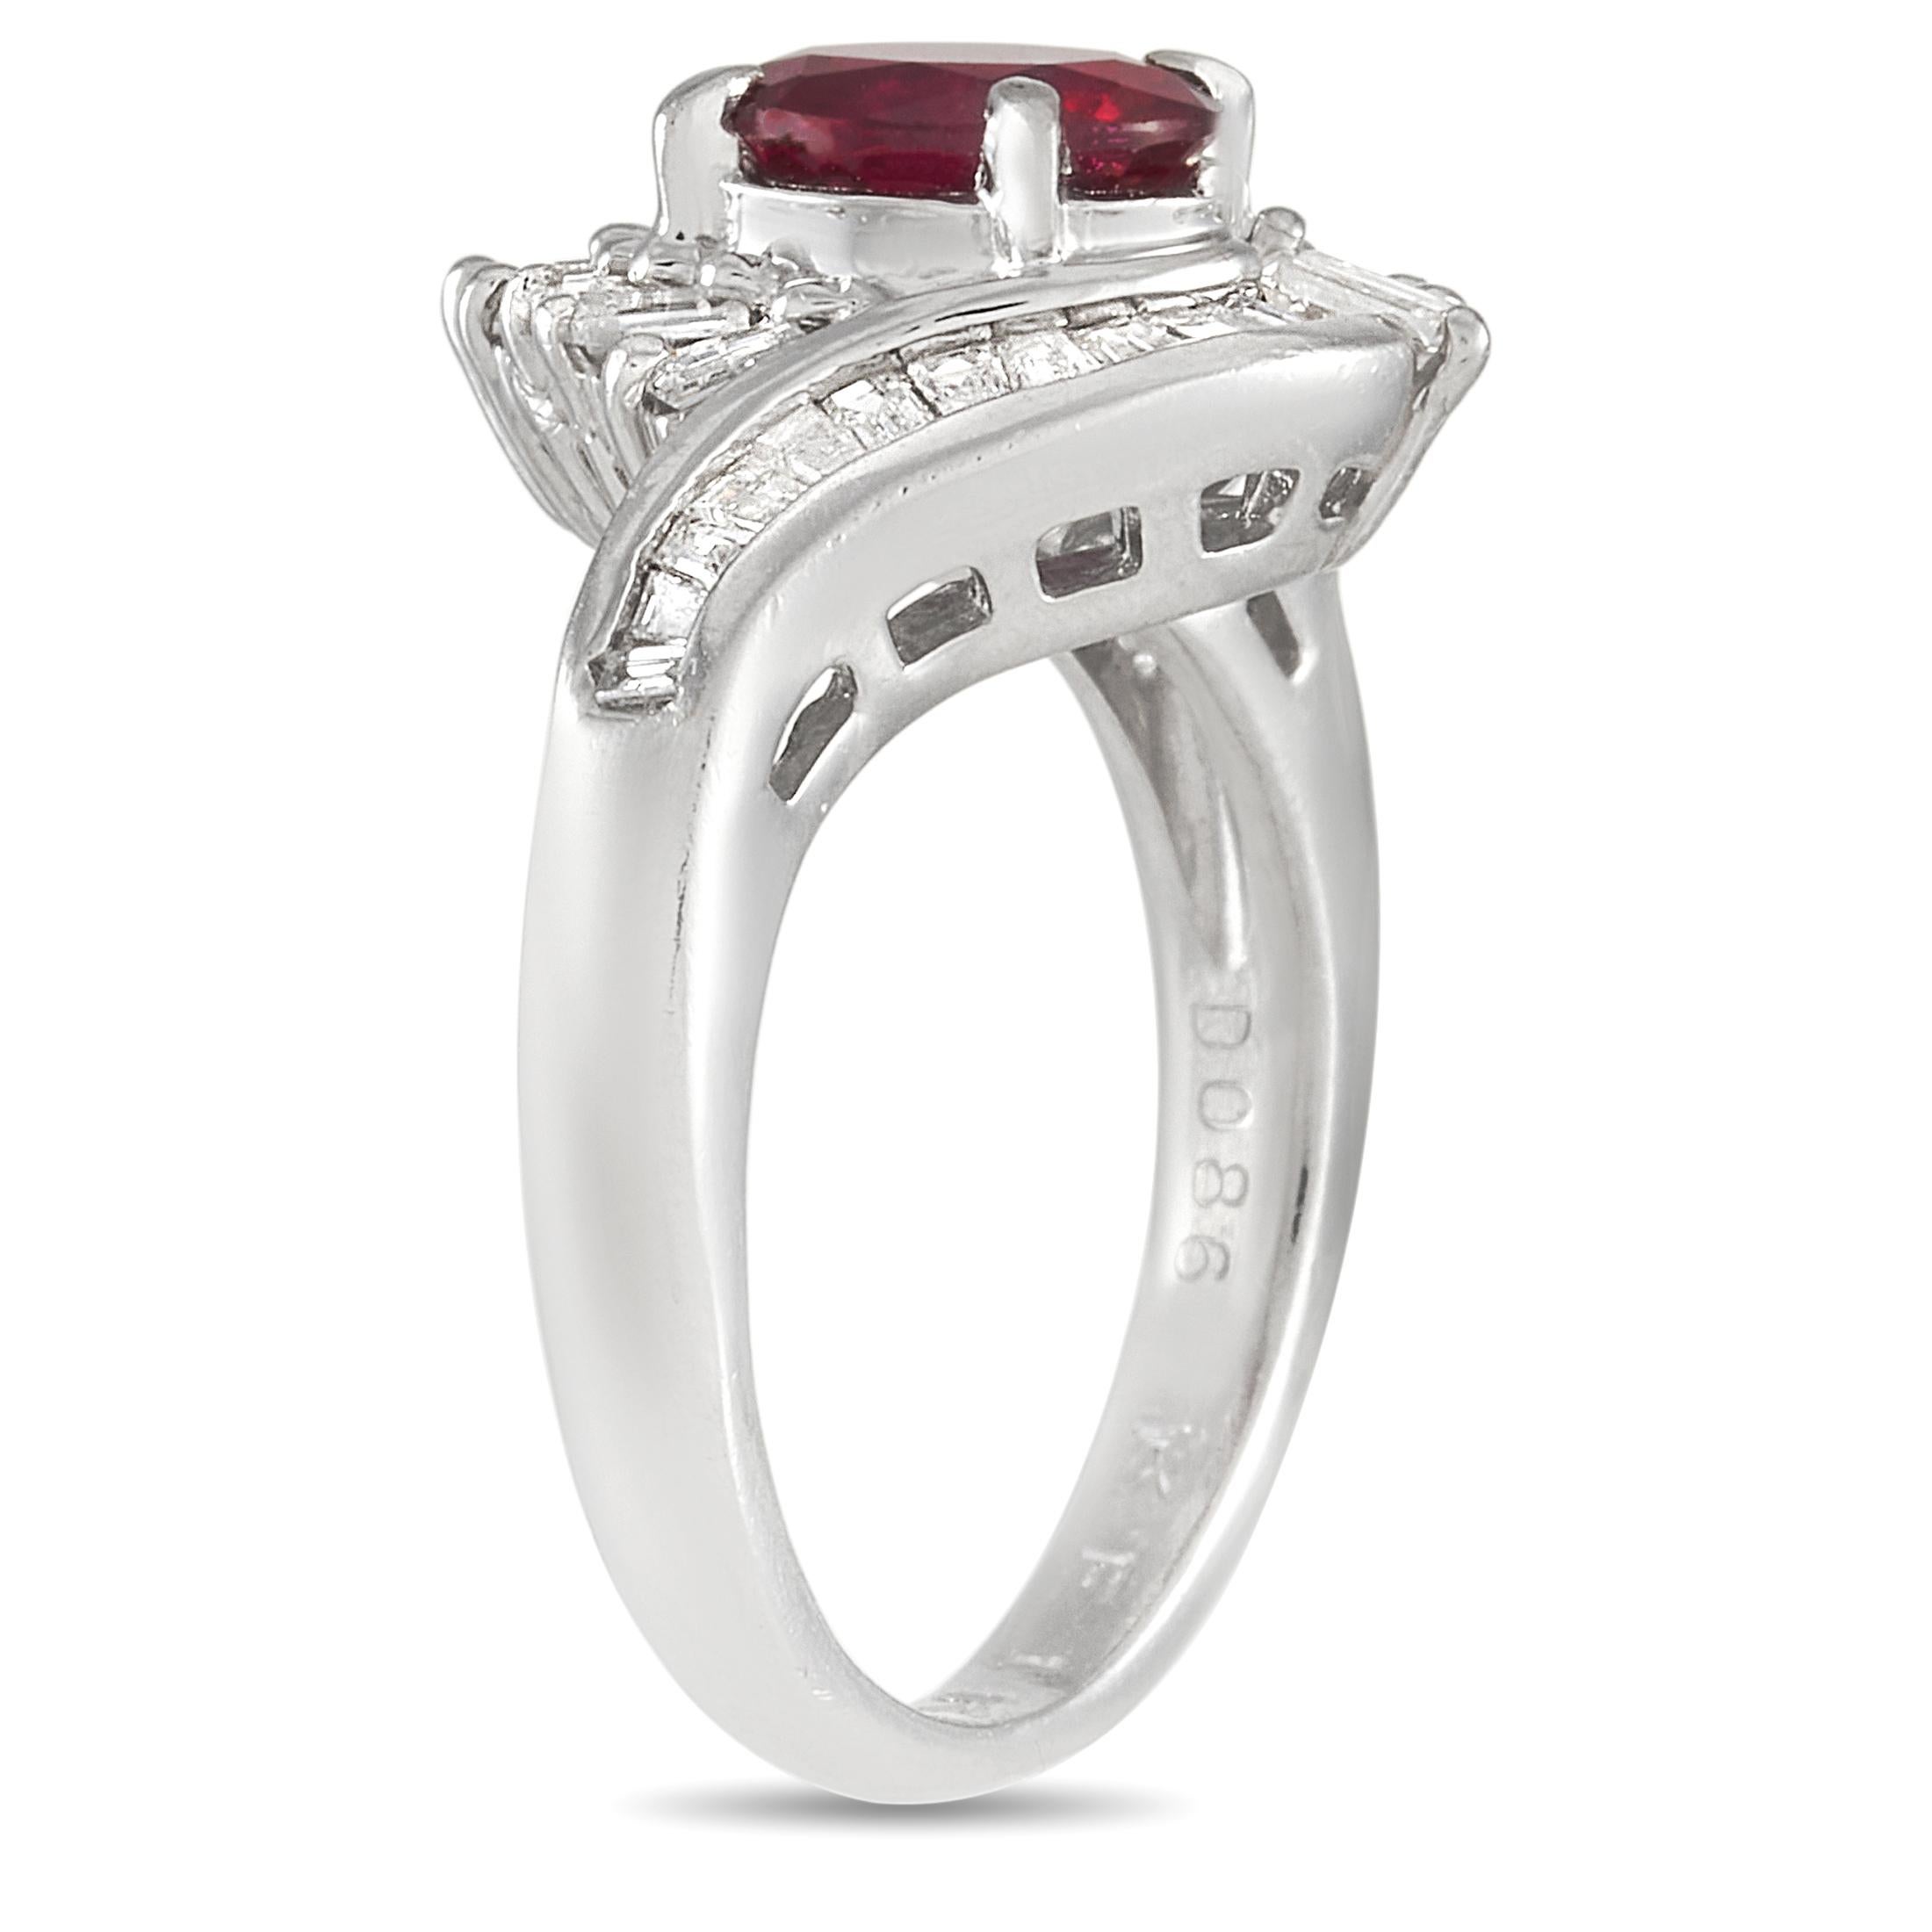 A dazzling Art Deco inspired setting ensures that this breathtaking ring will never go out of style. It features an opulent 1.29 carat ruby center stone, which is encircled by a captivating geometric halo of diamond baguettes totaling 0.86 carats.